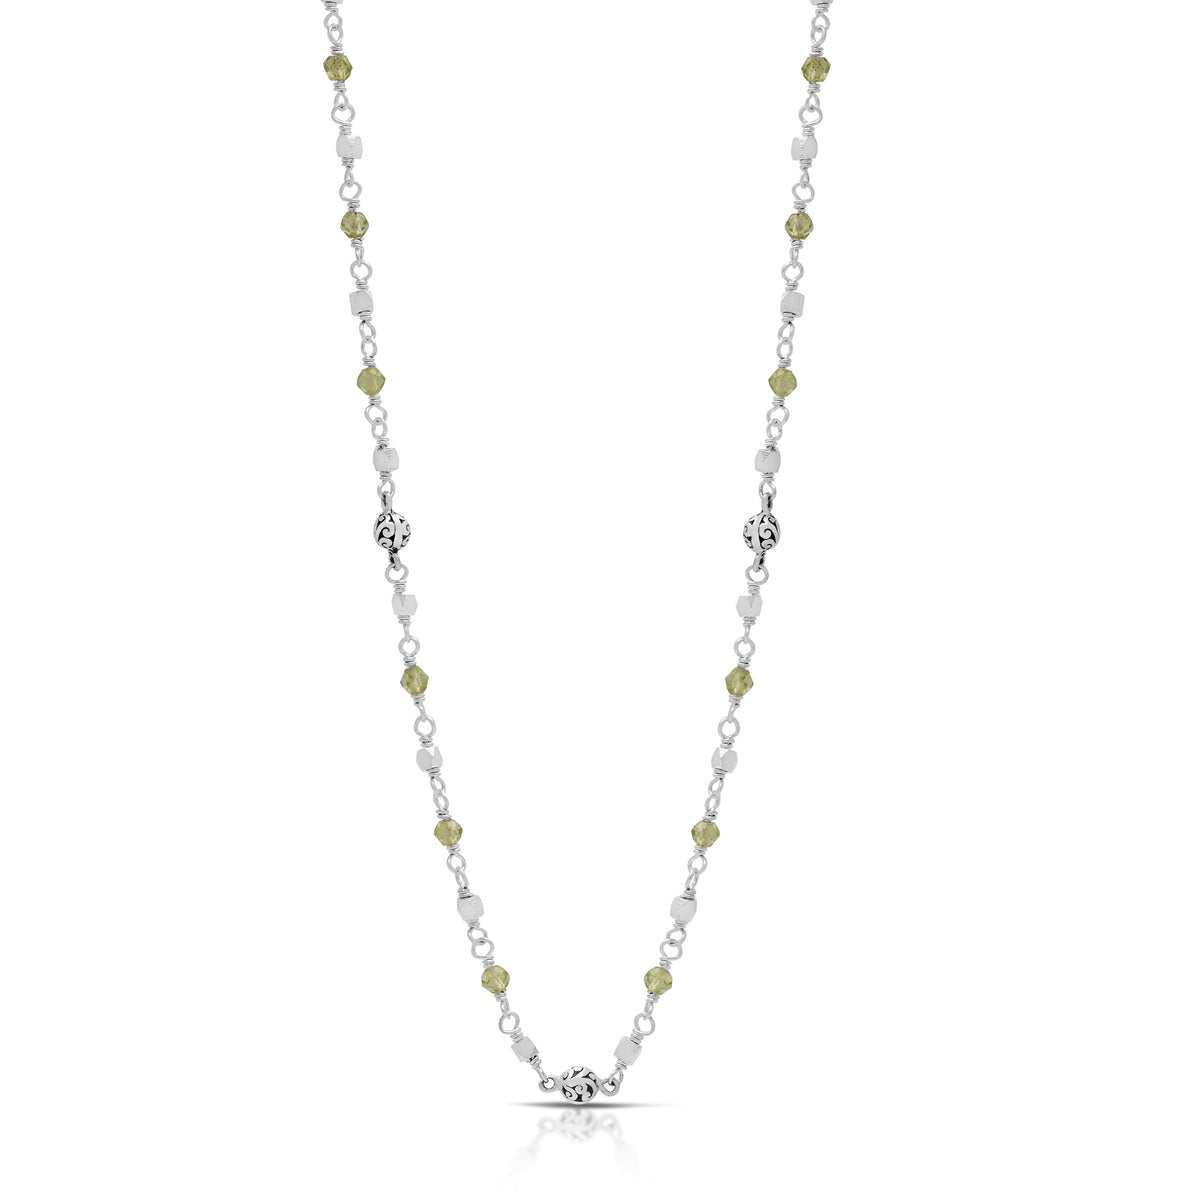 Faceted Petite Peridot Beads with LH Scroll Beads Single Strand Wire-Wrap Necklace (17''-20")